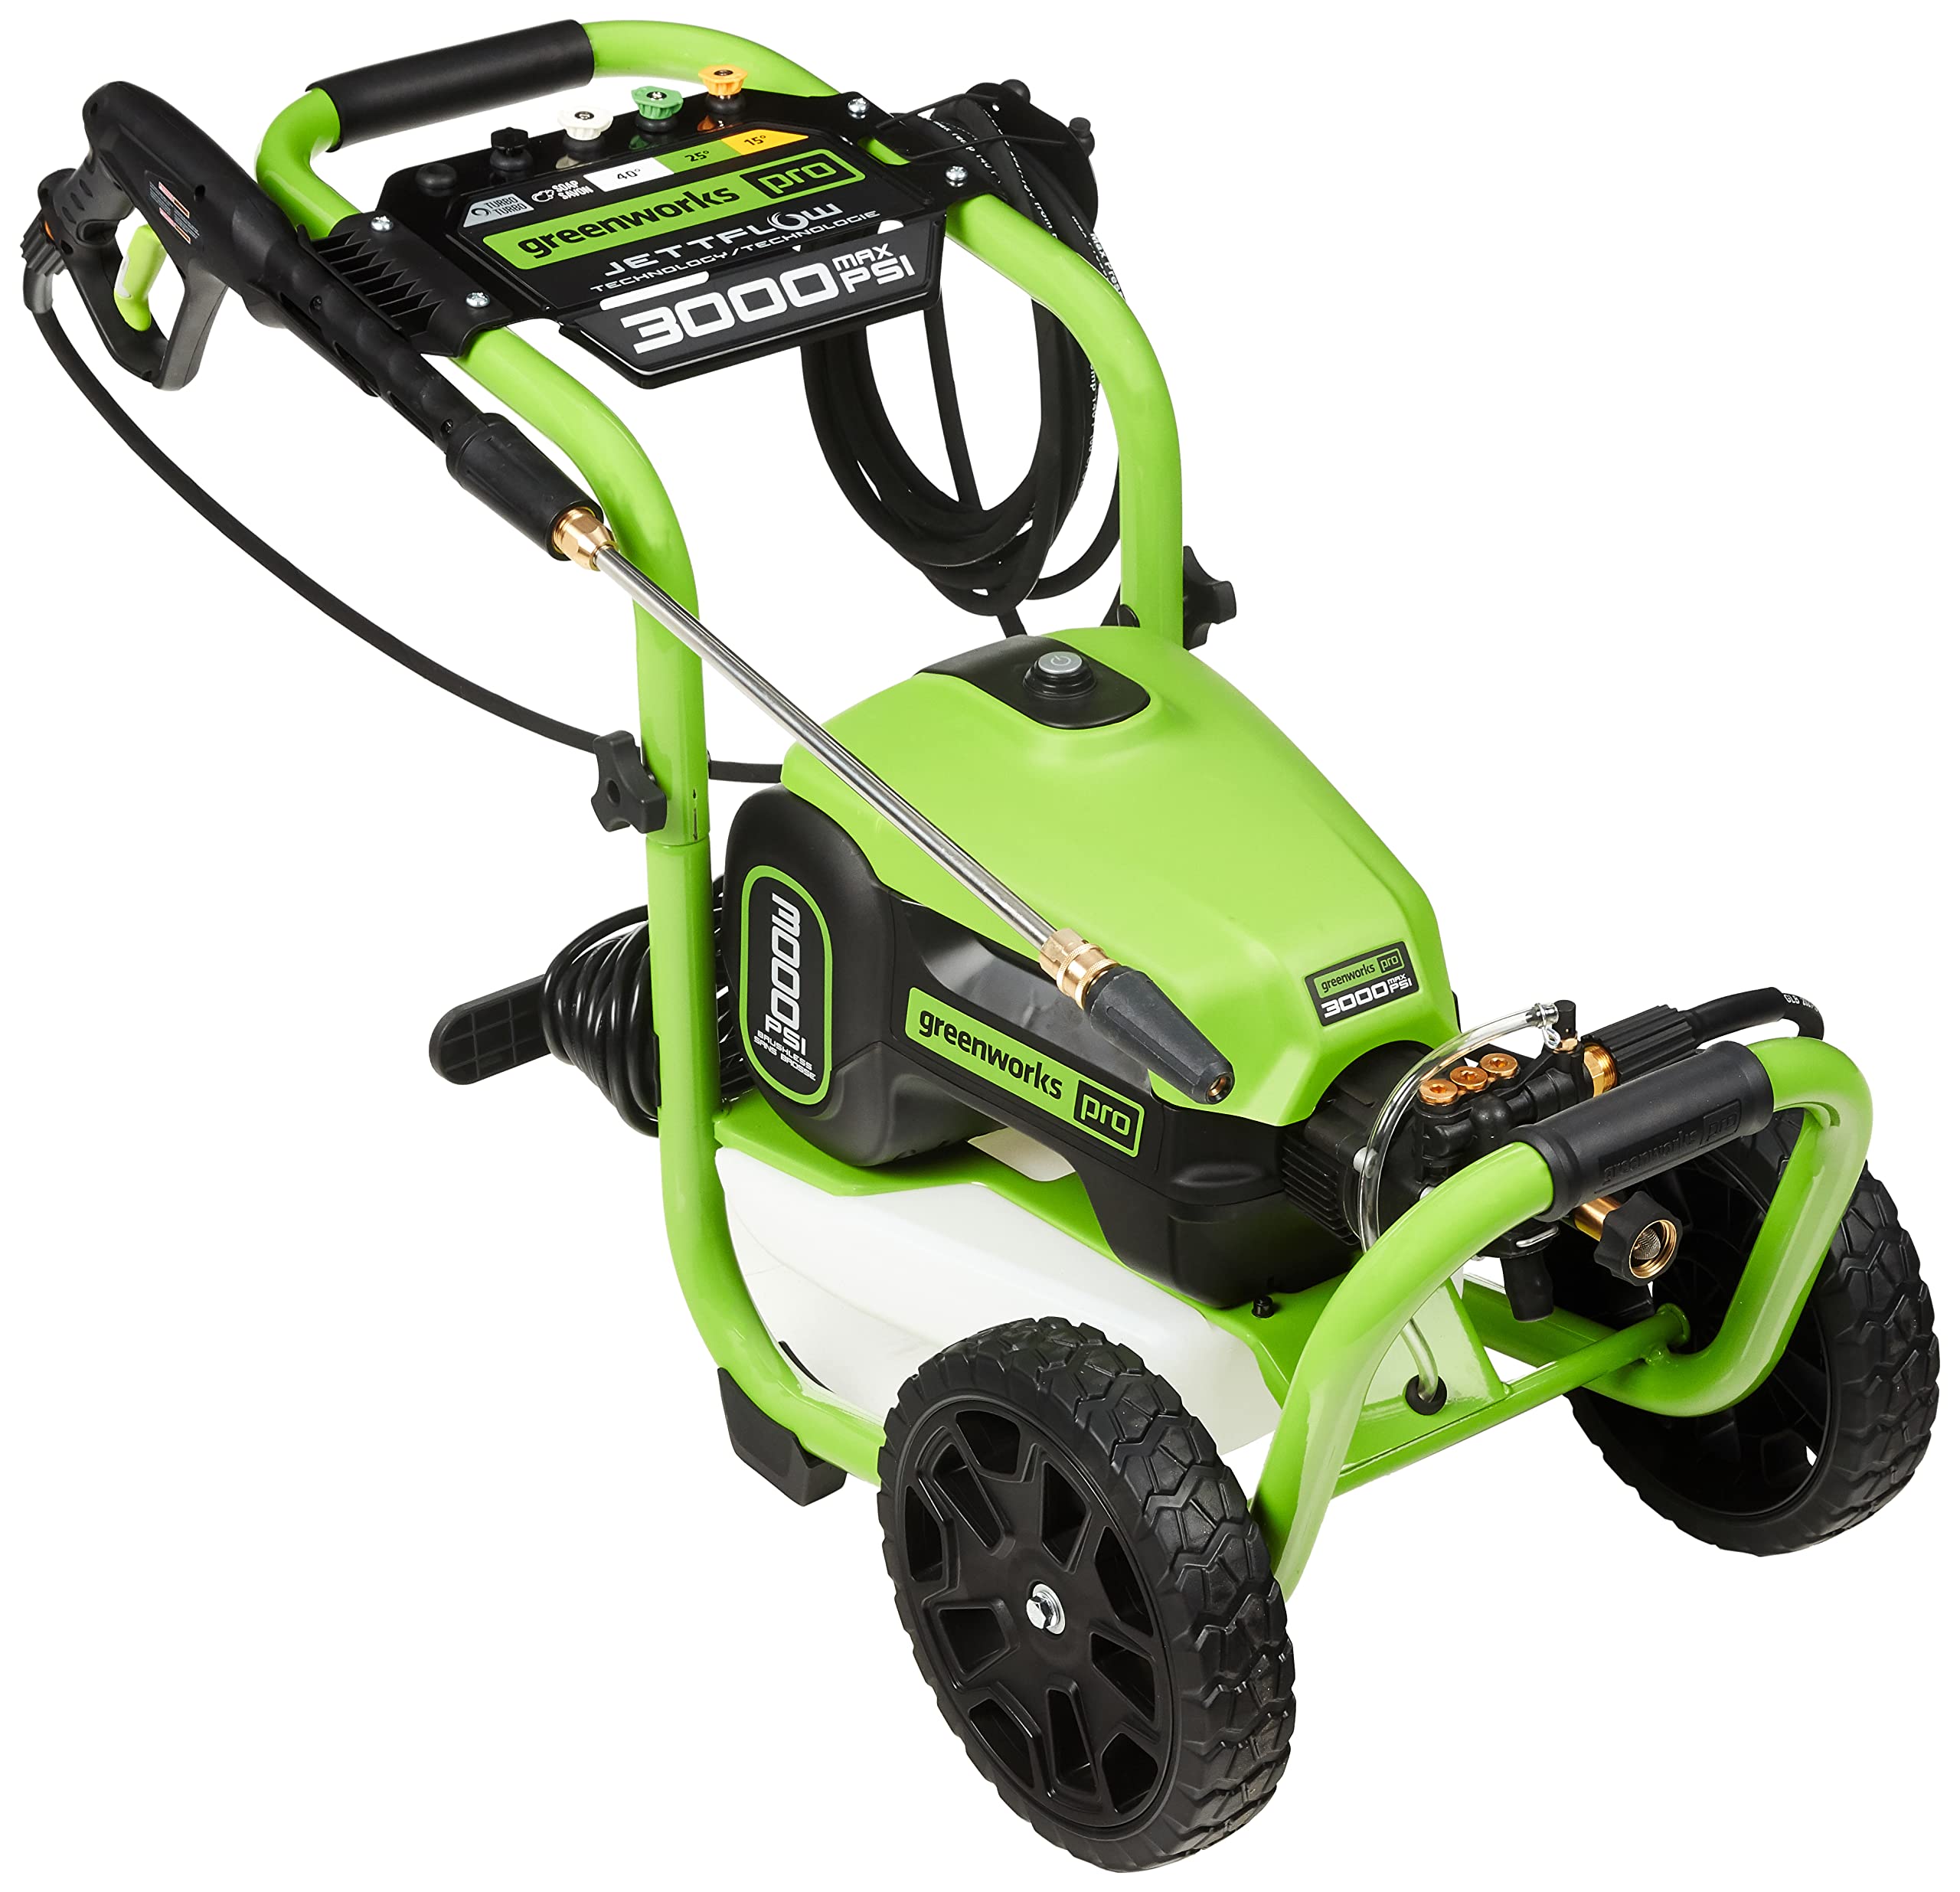 Greenworks 3000 PSI (1.1 GPM) TruBrushless Electric Pressure Washer $208.64 + Free Shipping